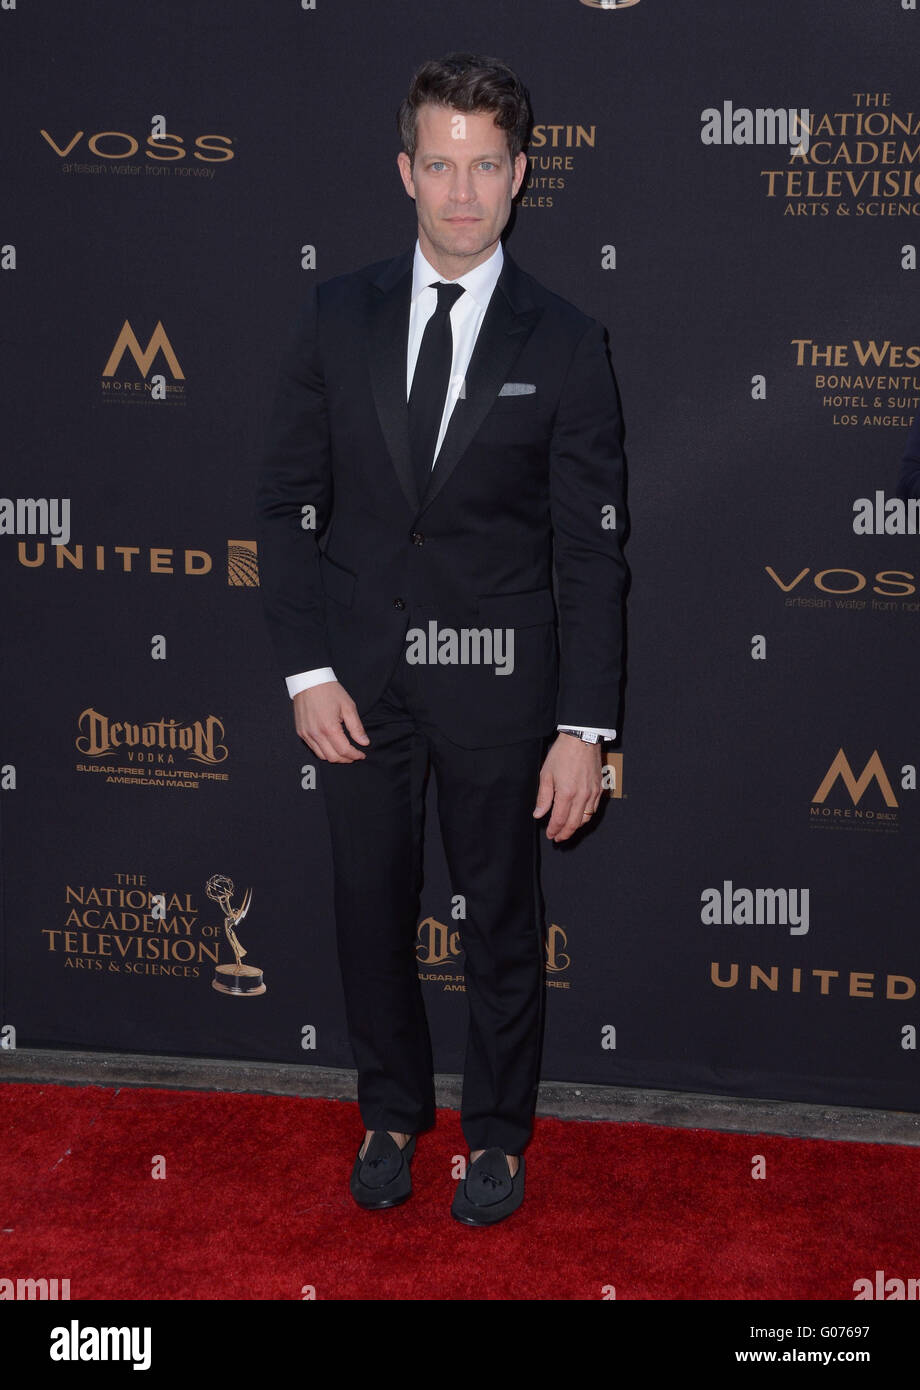 Los Angeles, CA, USA. 29th Apr, 2016. 29 April 2016 - Los Angeles, California - Nate Berkis. Arrivals for the 43rd Annual Daytime Creative Arts Emmy Awards held at the Westin Bonaventure Hotel and Suites Photo Credit: Birdie Thompson/AdMedia Credit:  Birdie Thompson/AdMedia/ZUMA Wire/Alamy Live News Stock Photo